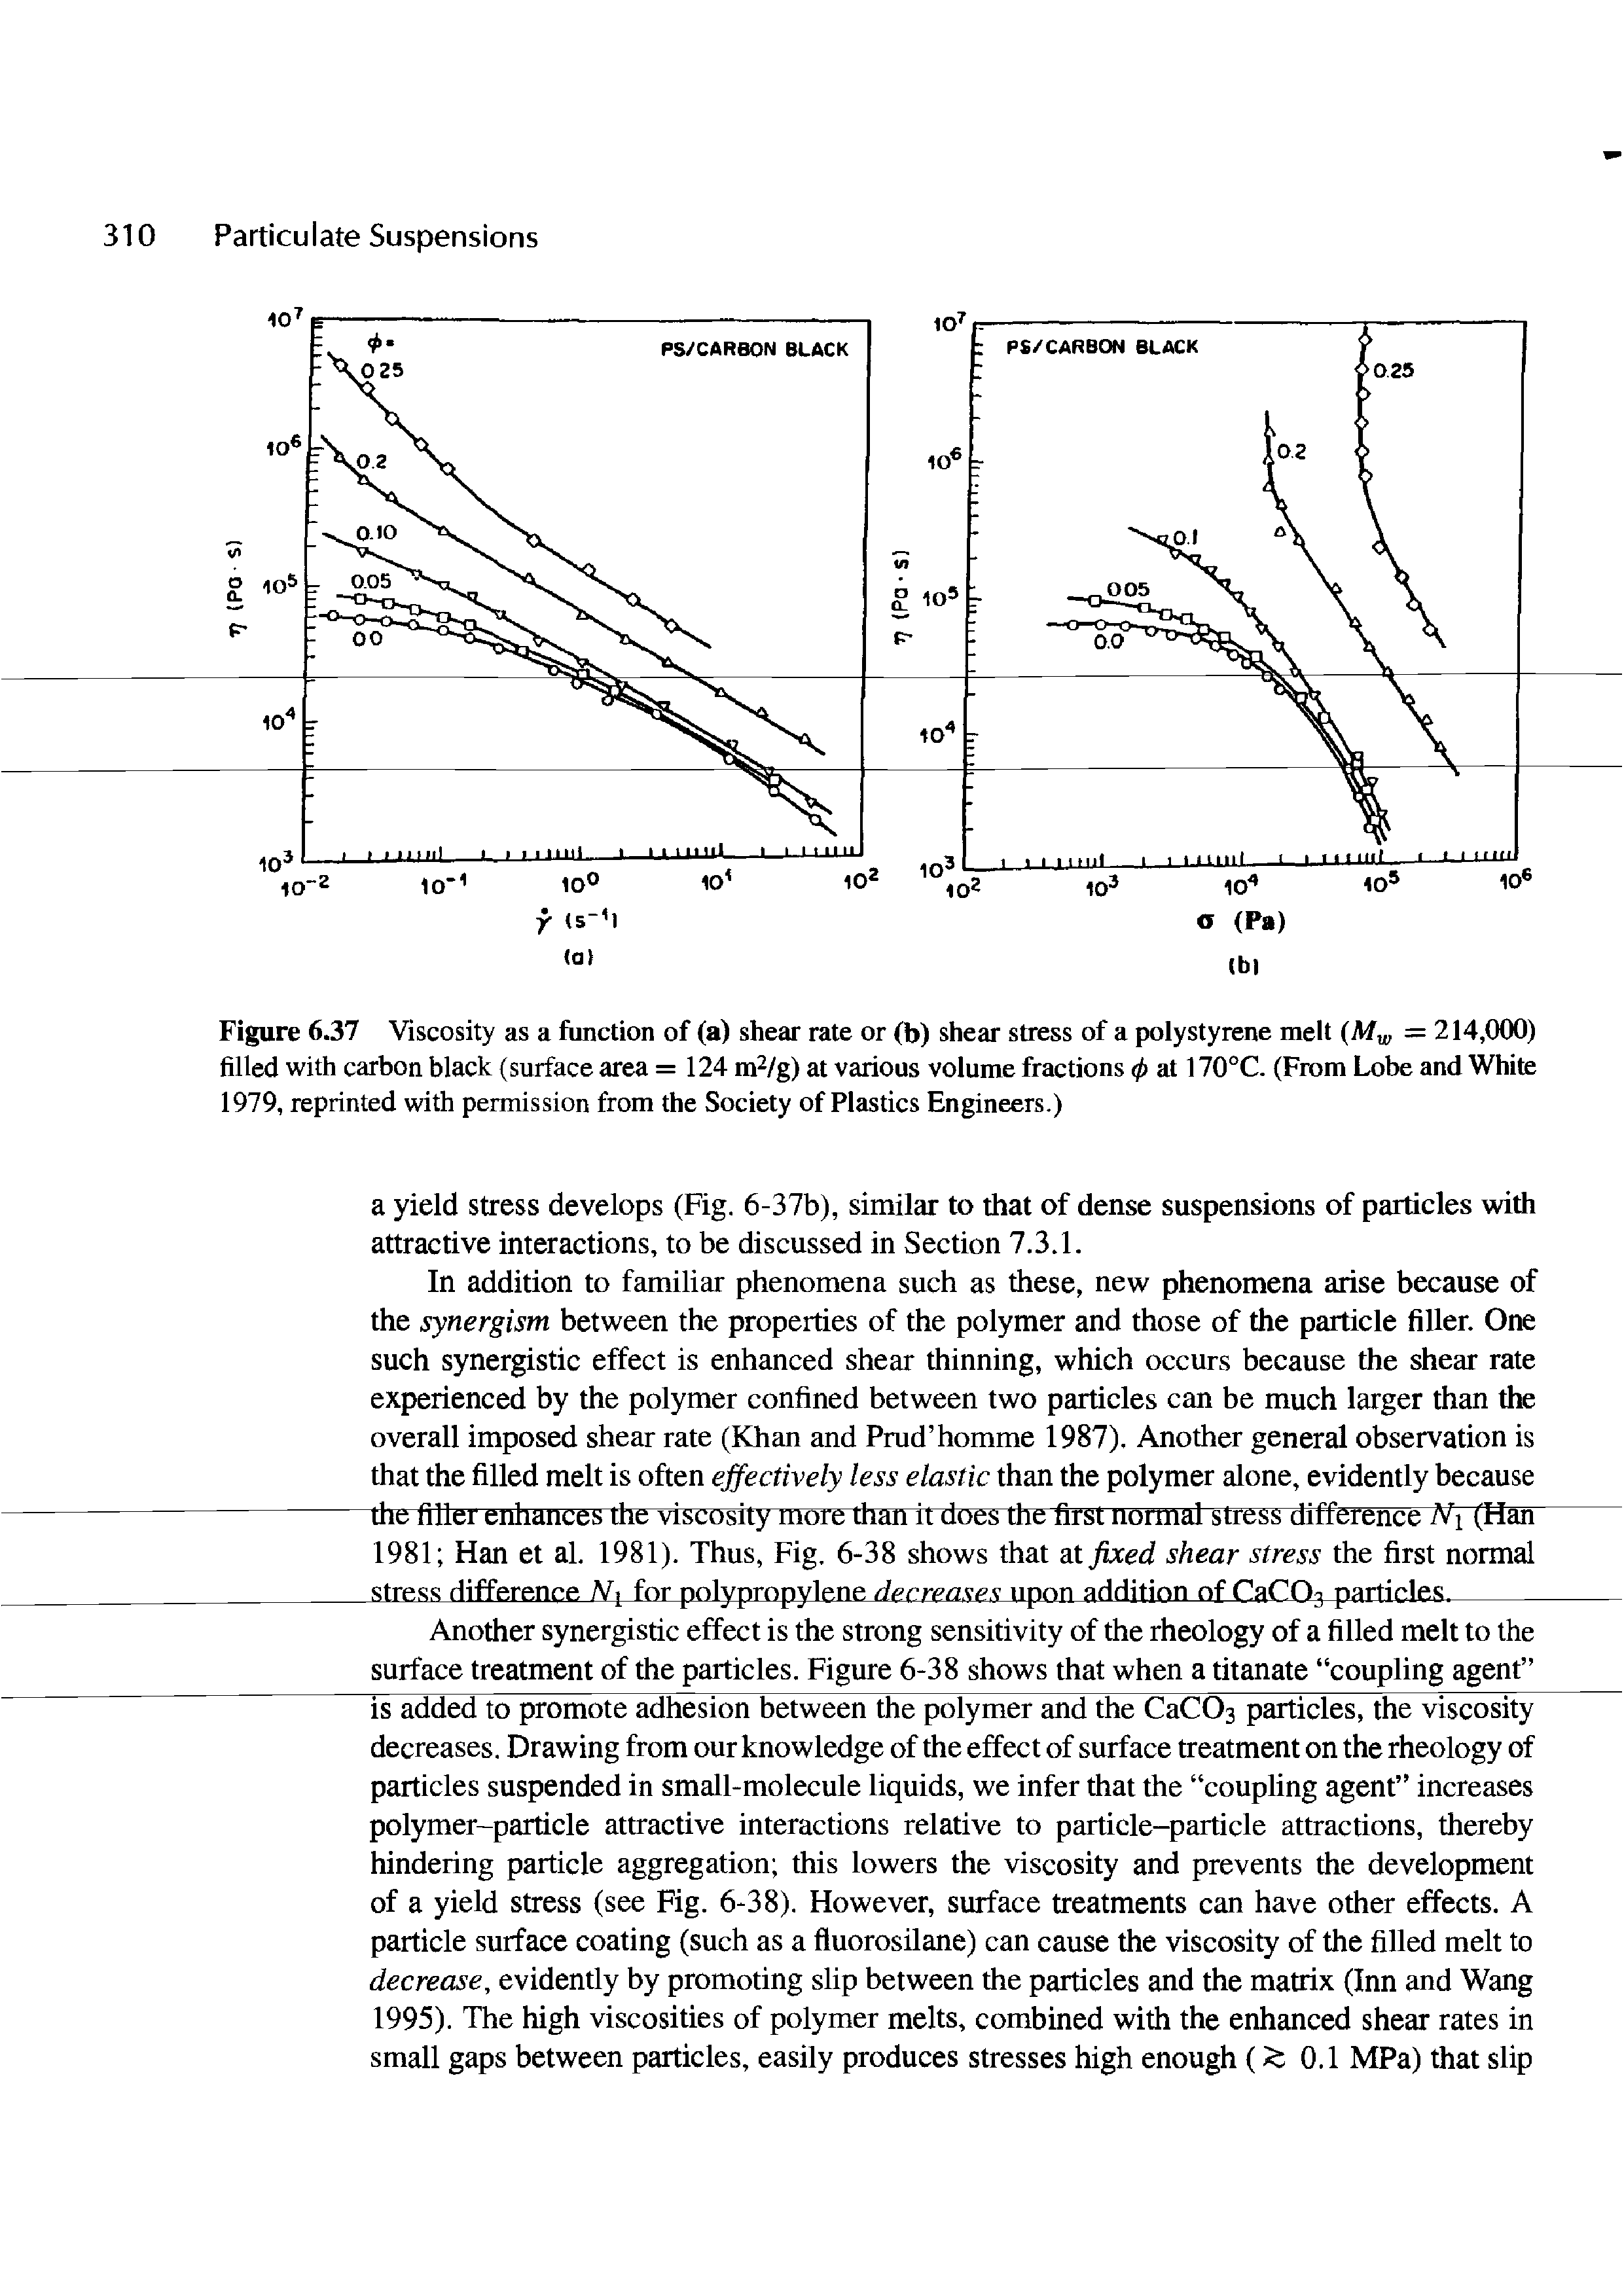 Figure 6.37 Viscosity as a function of (a) shear rate or (b) shear stress of a polystyrene melt My, = 214,000) filled with carbon black (surface area =124 m /g) at various volume fractions 0 at 170°C. (From Lobe and White 1979, reprinted with permission from the Society of Plastics Engineers.)...